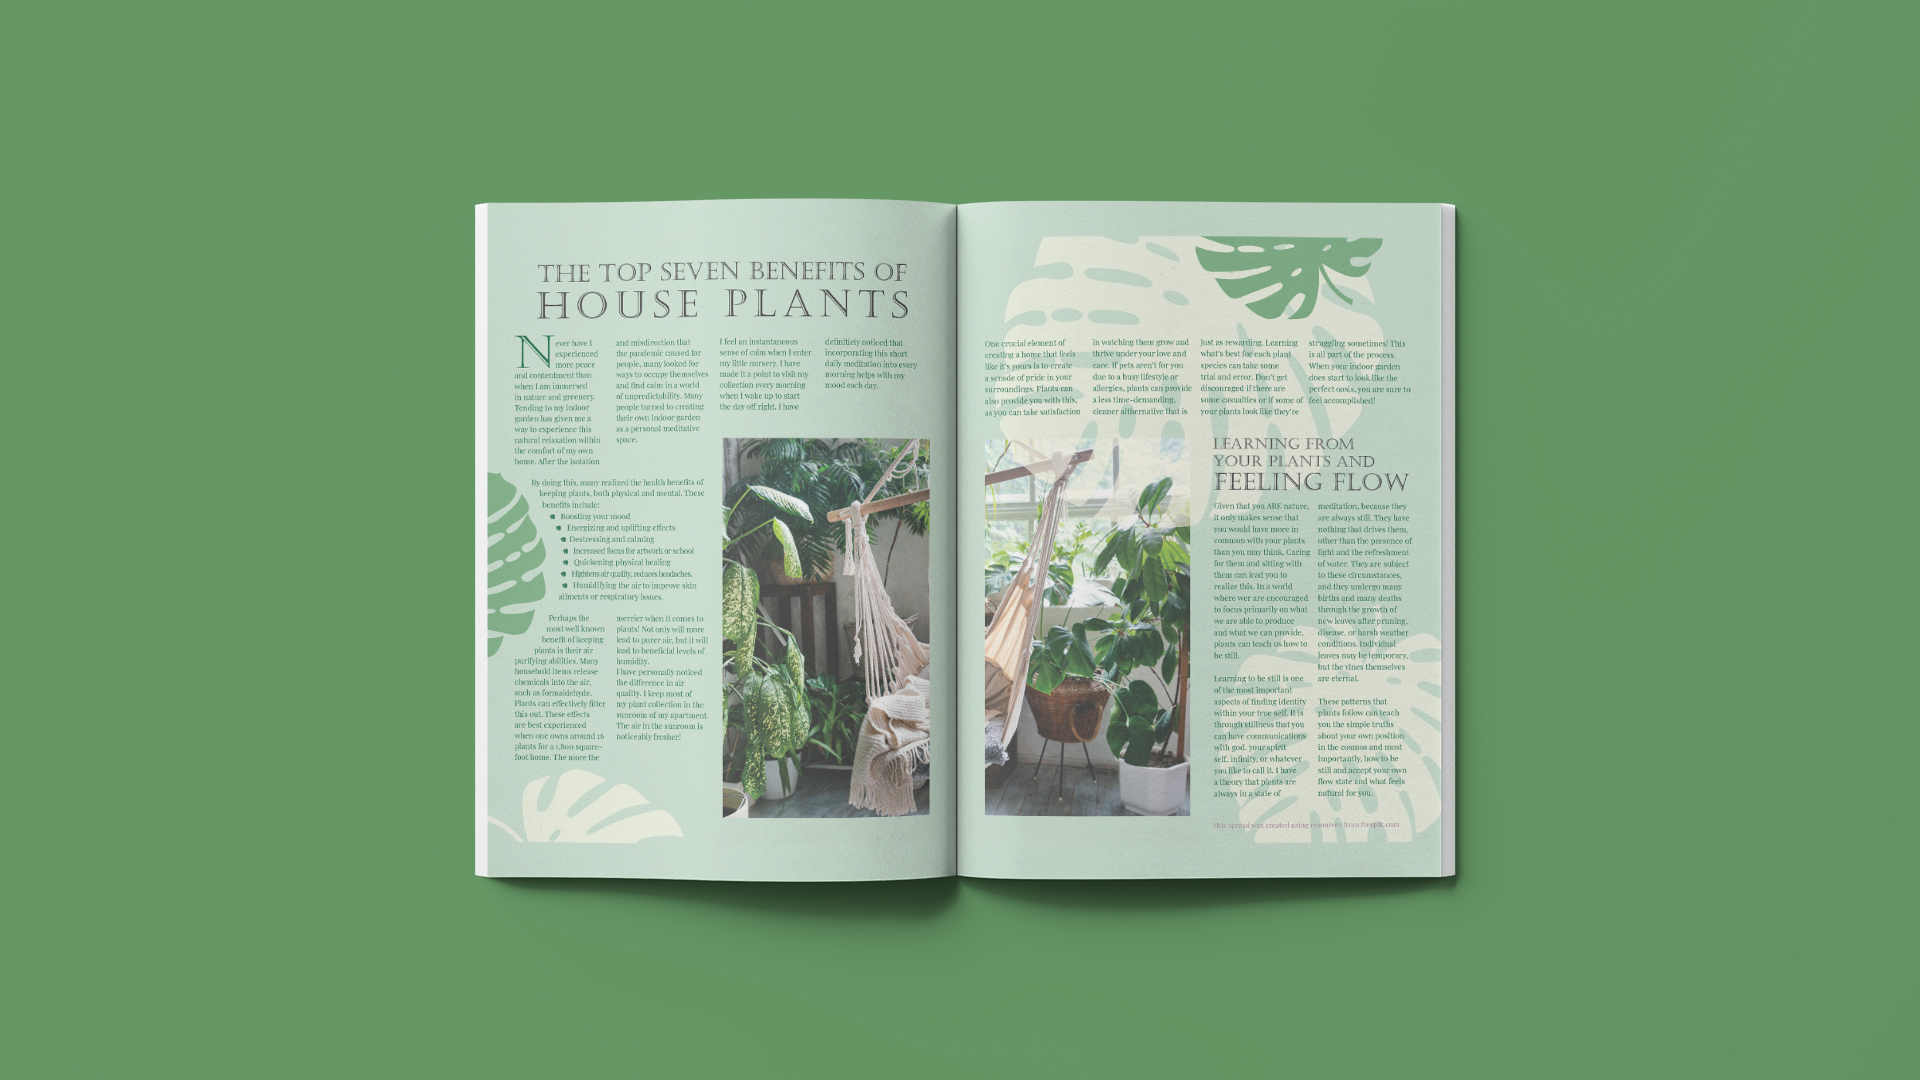 “Houseplant Spread”  / “Houseplant Spread,” magazine spread design, 8.5 by 11 inches, 2021. This spread details the benefits of keeping plants in the home.